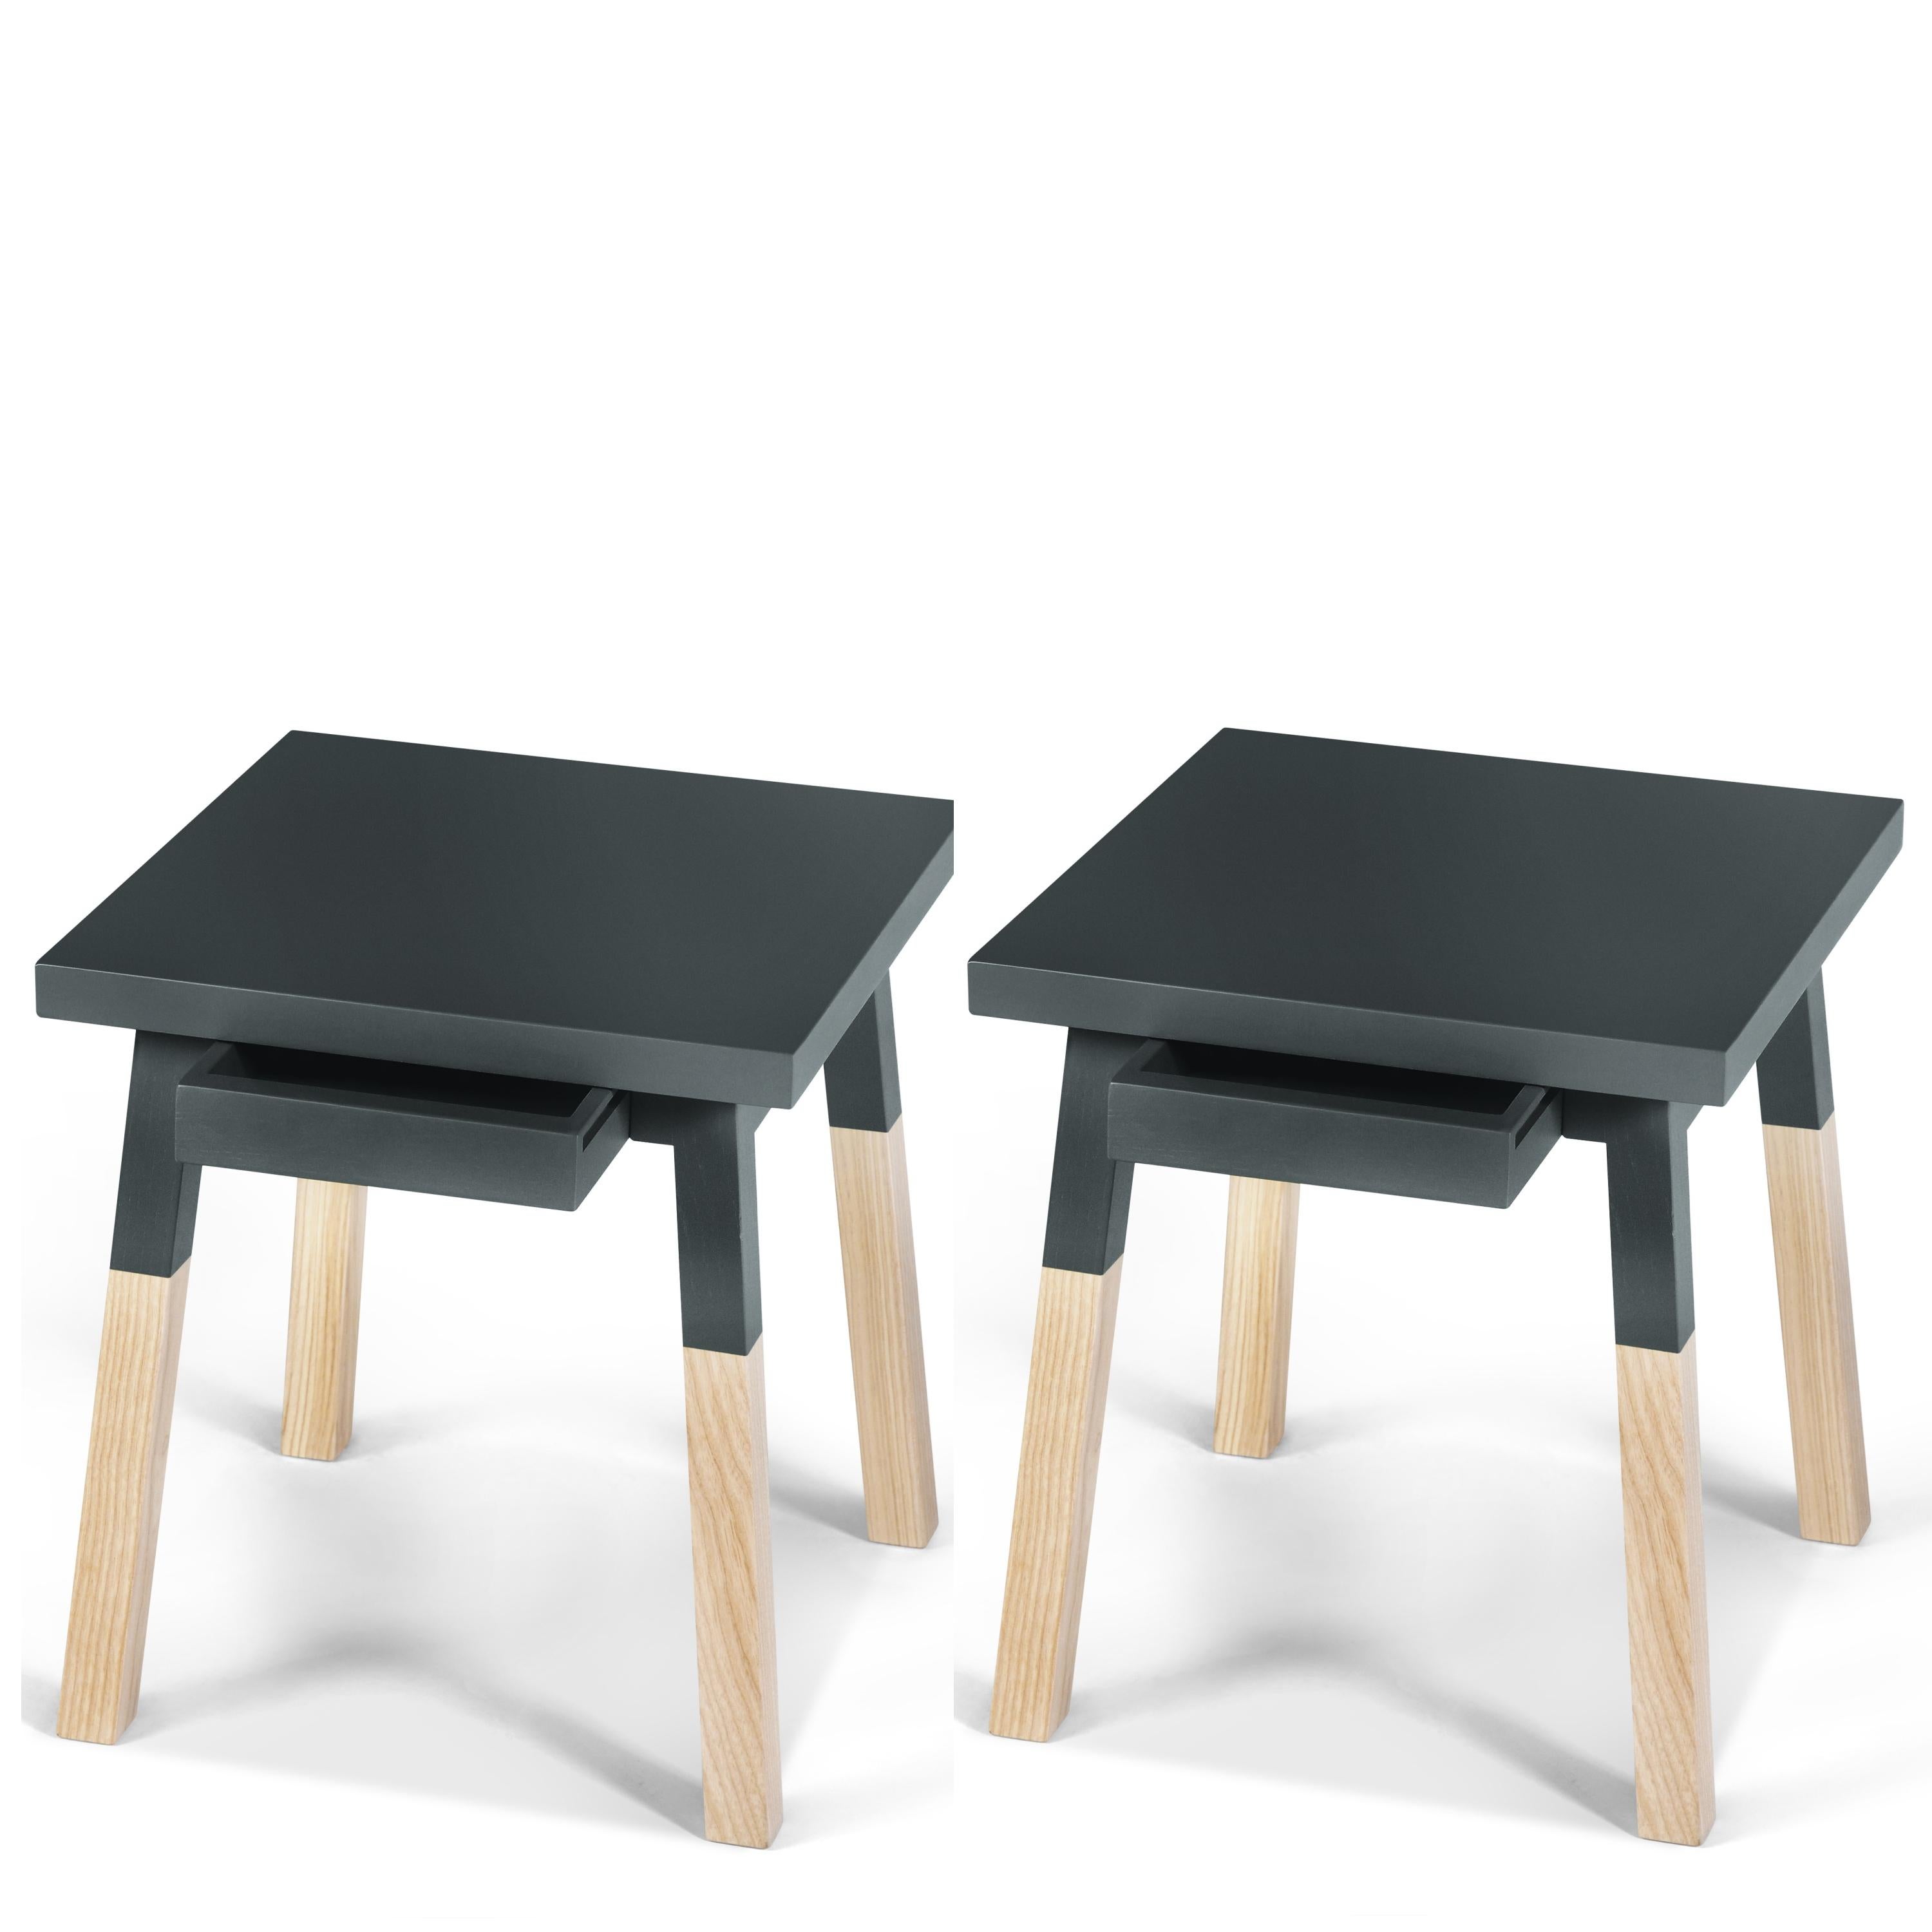 Scandinavian Modern Dark Blue Bedside Tables in Ash x 2, Design Eric Gizard and 100% Made in France For Sale